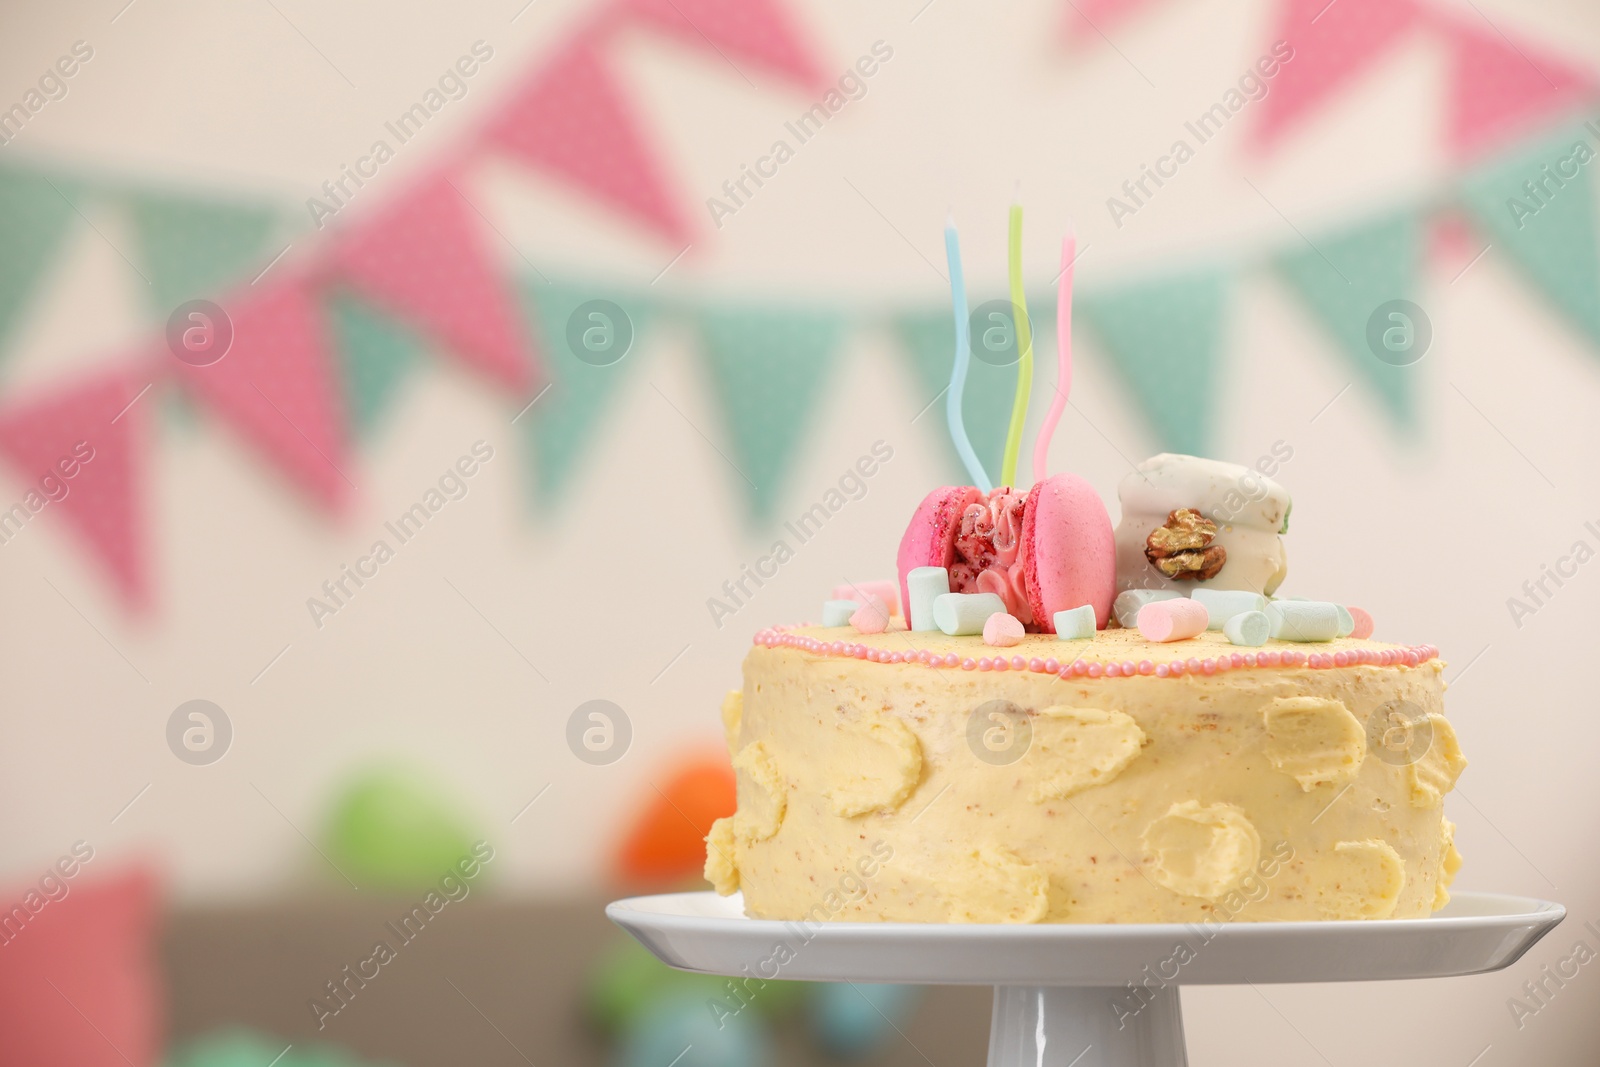 Photo of Delicious cake decorated with macarons and marshmallows against blurred background, space for text